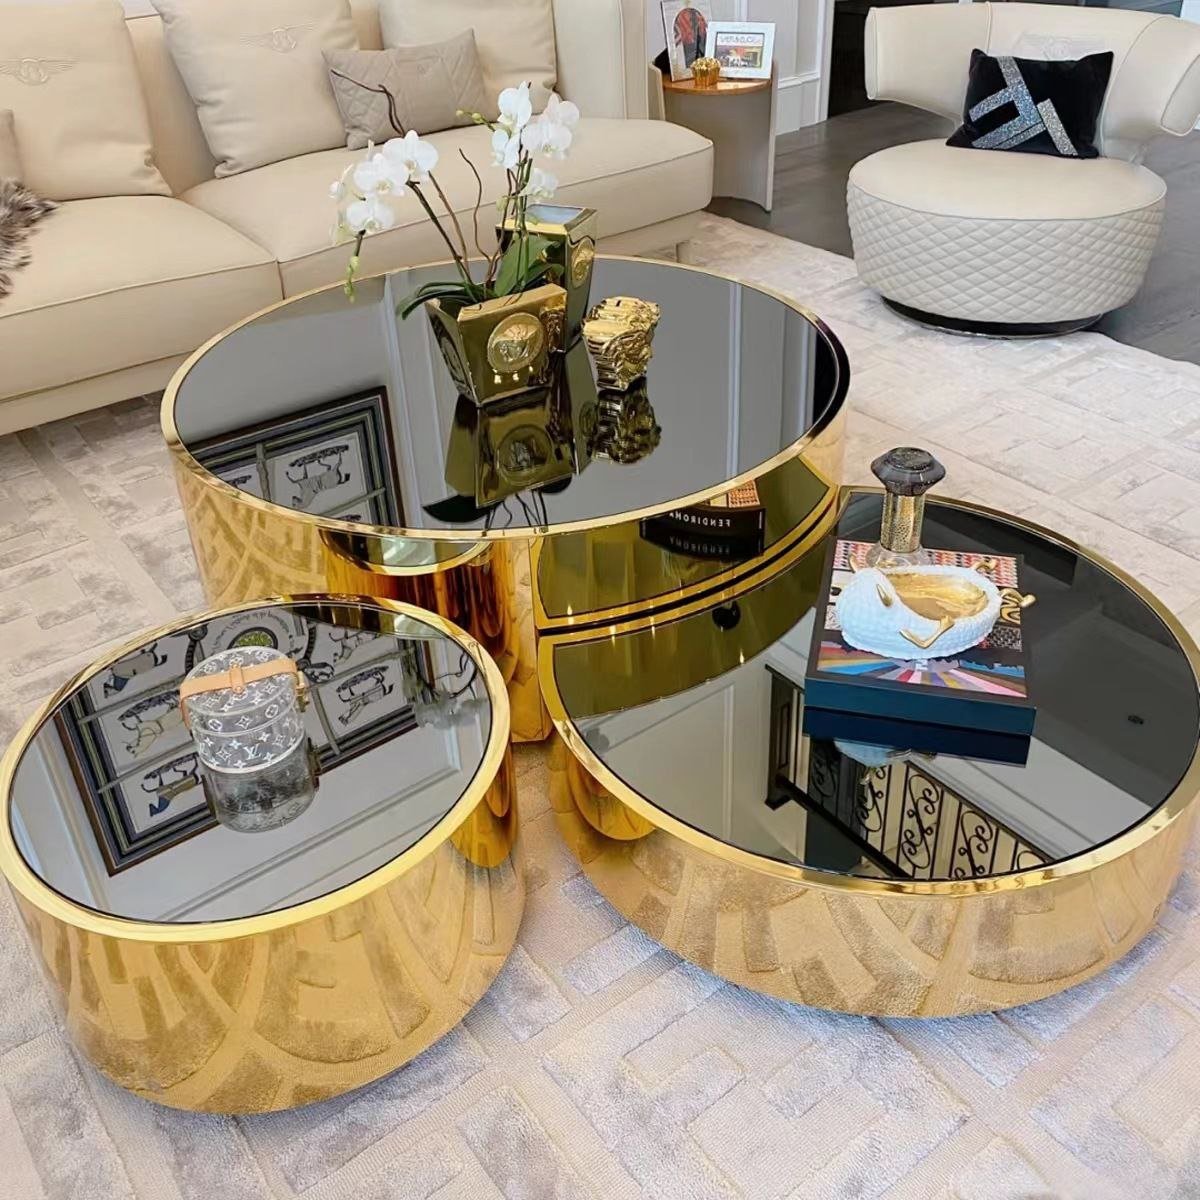 3 In 1 Round Glass Coffee Table With Golden Stainless Steel